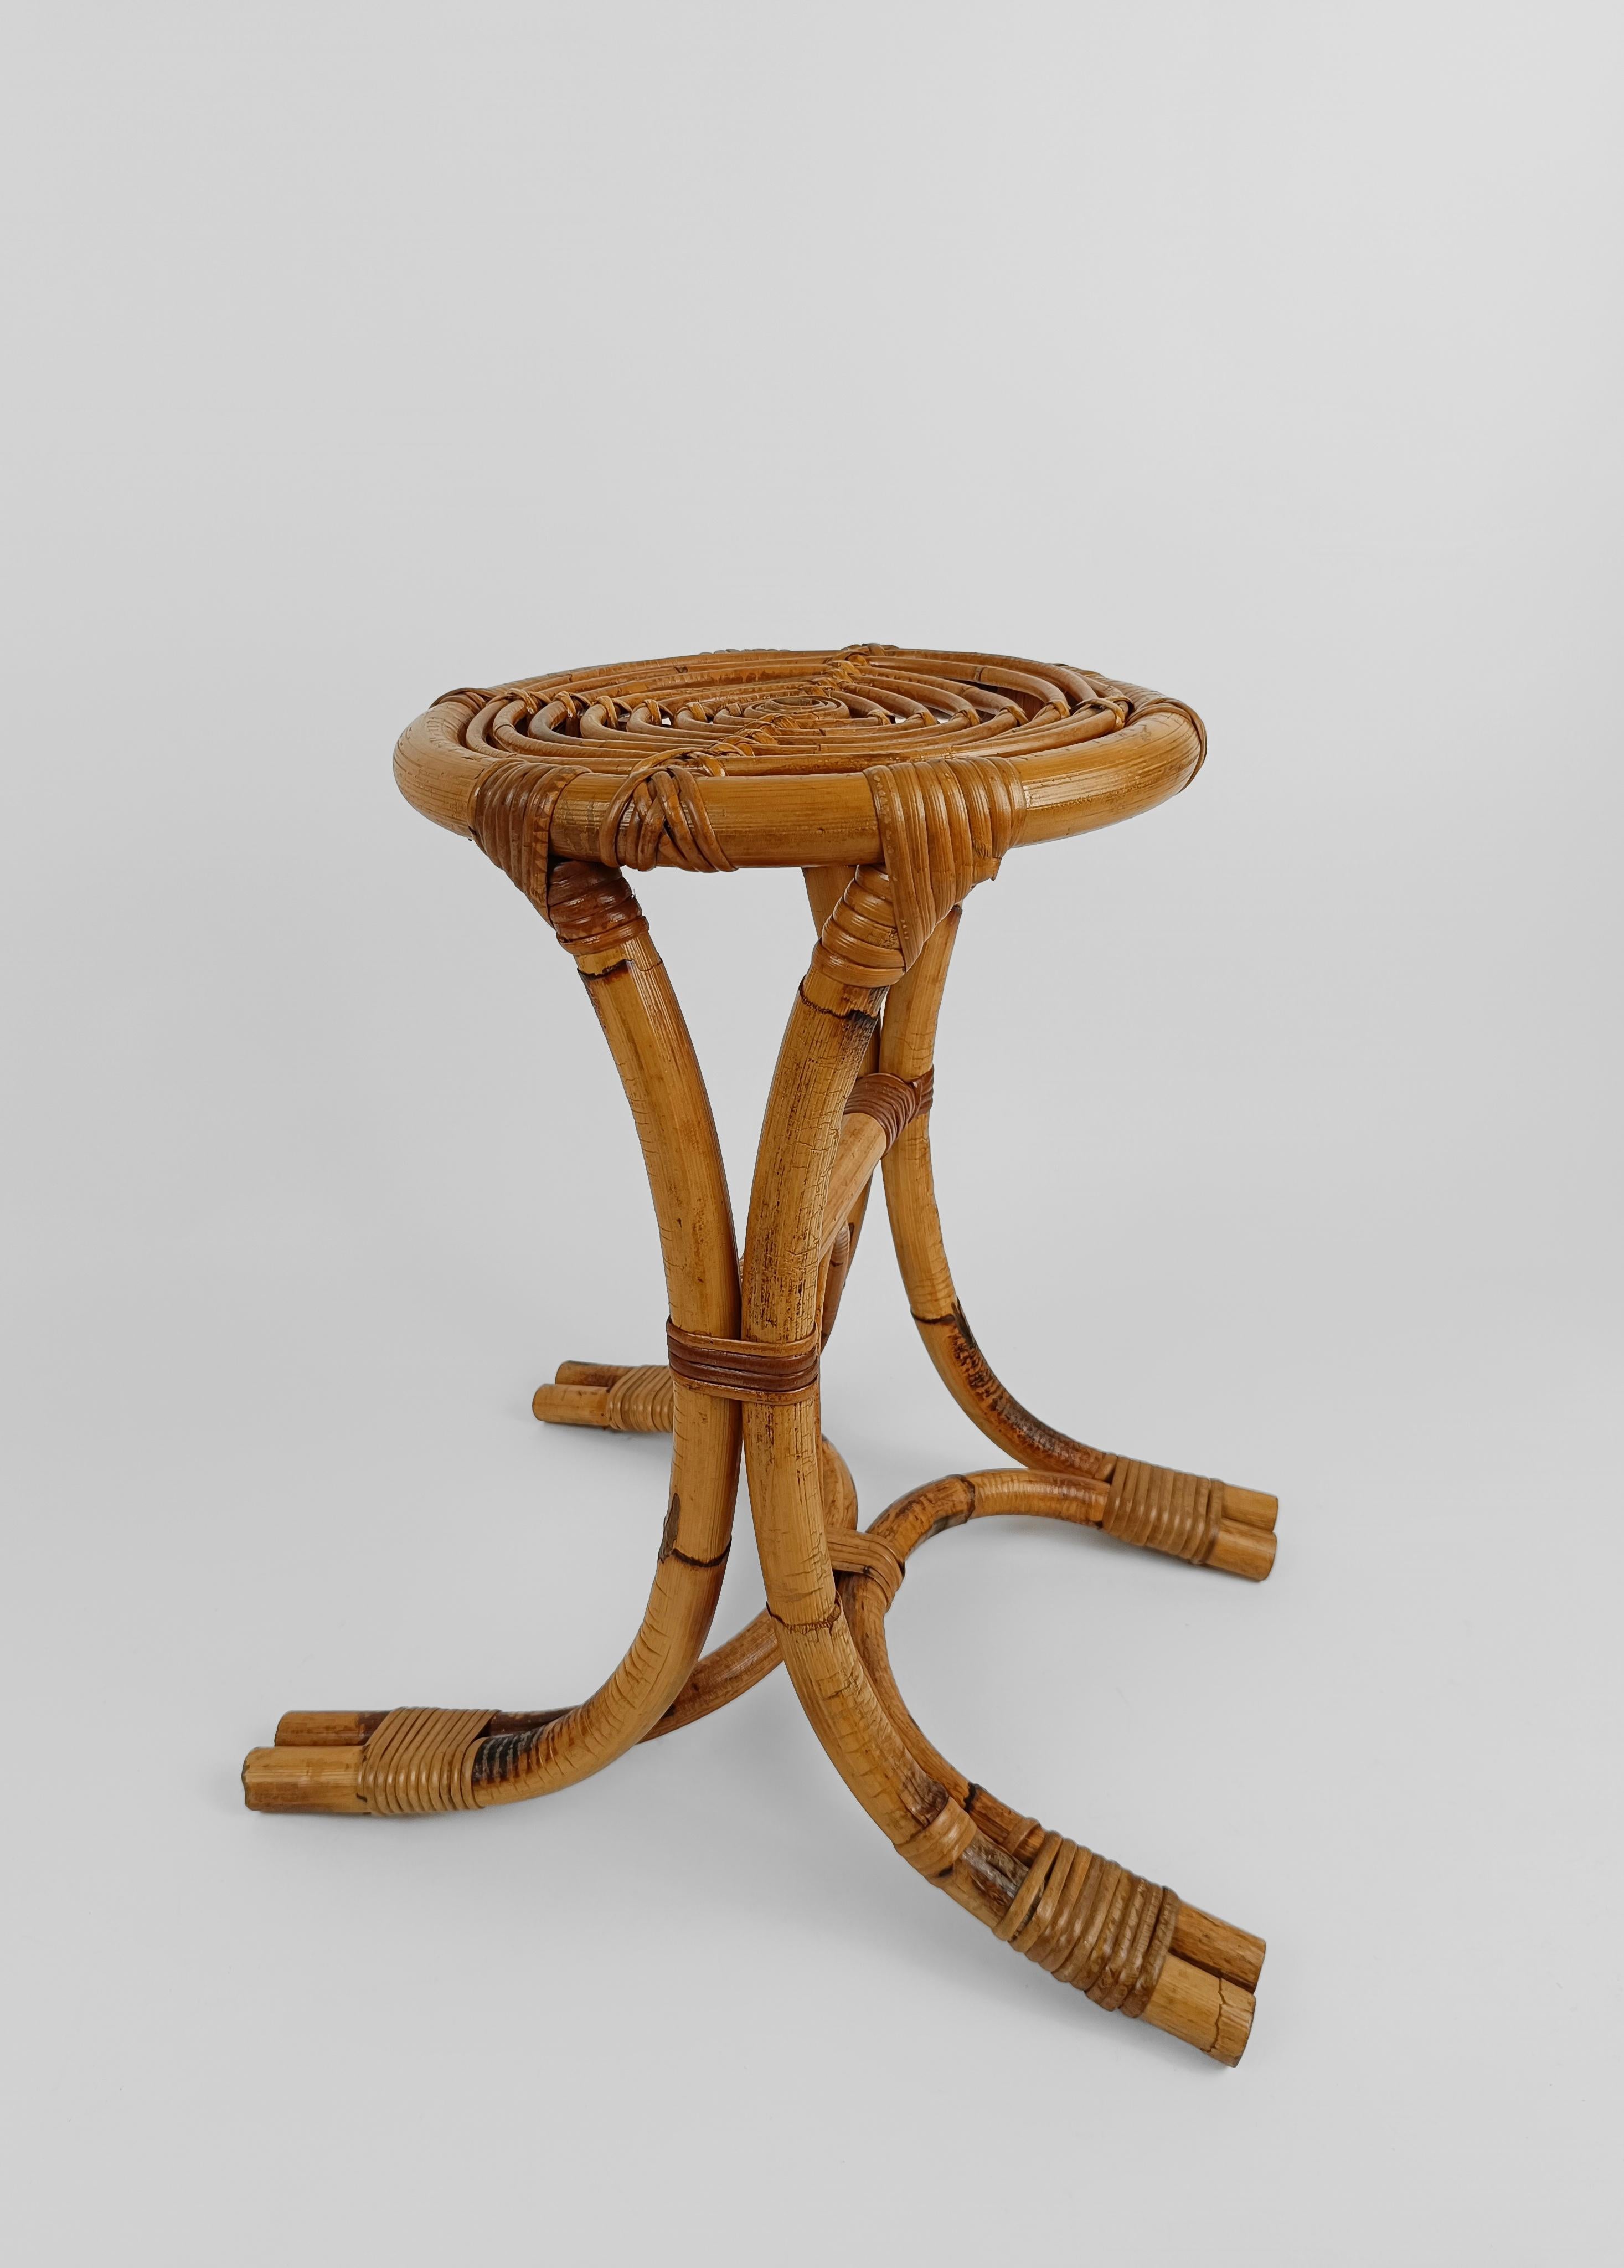 Italian Mid-Century Modern Bamboo Rattan and Cane Stool, 1960s  For Sale 7